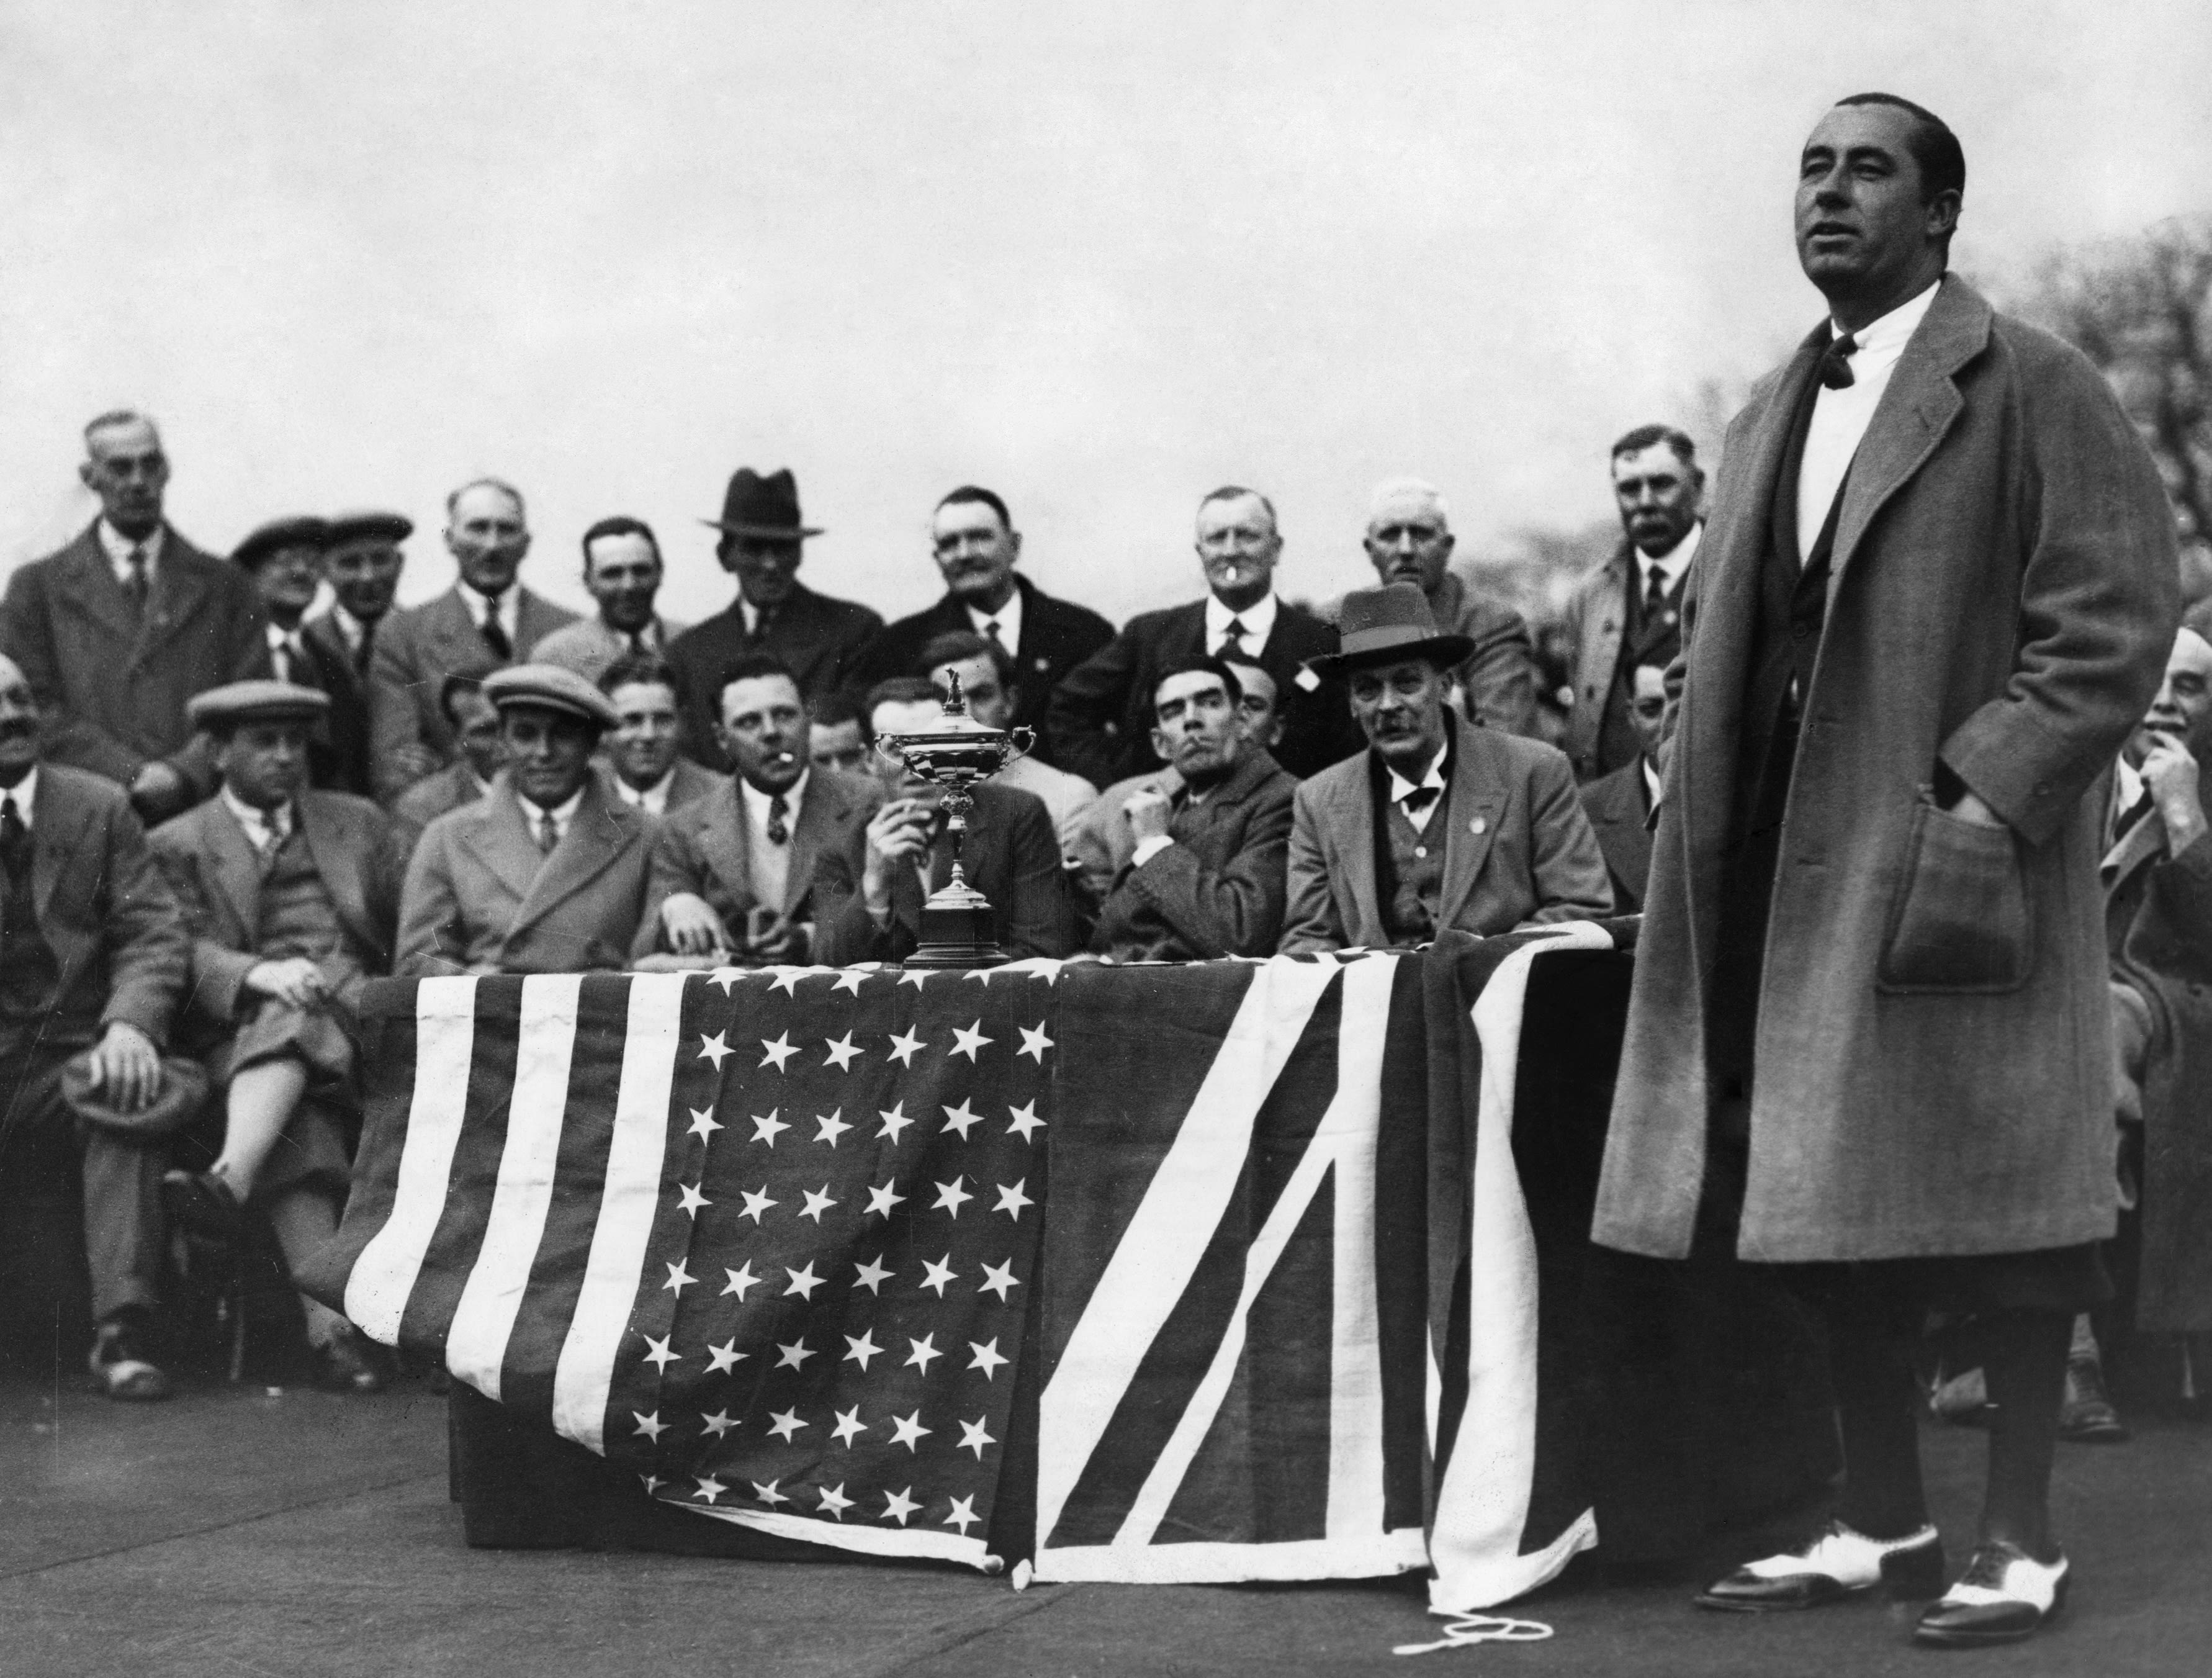 Walter Hagen at the Ryder Cup.